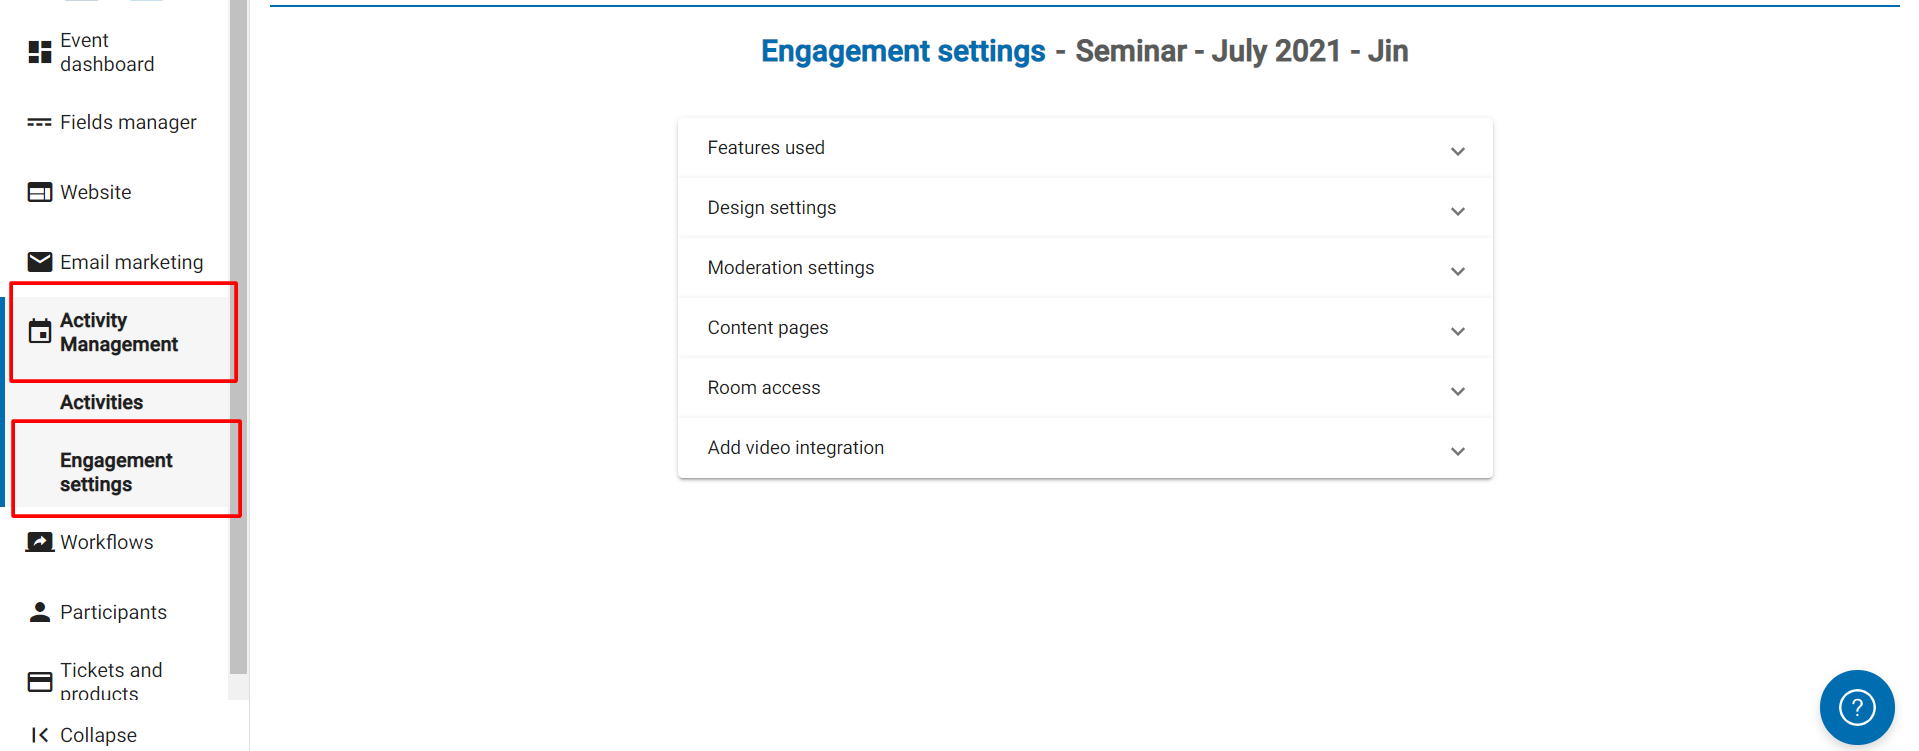 e_engagement_settings_page.png